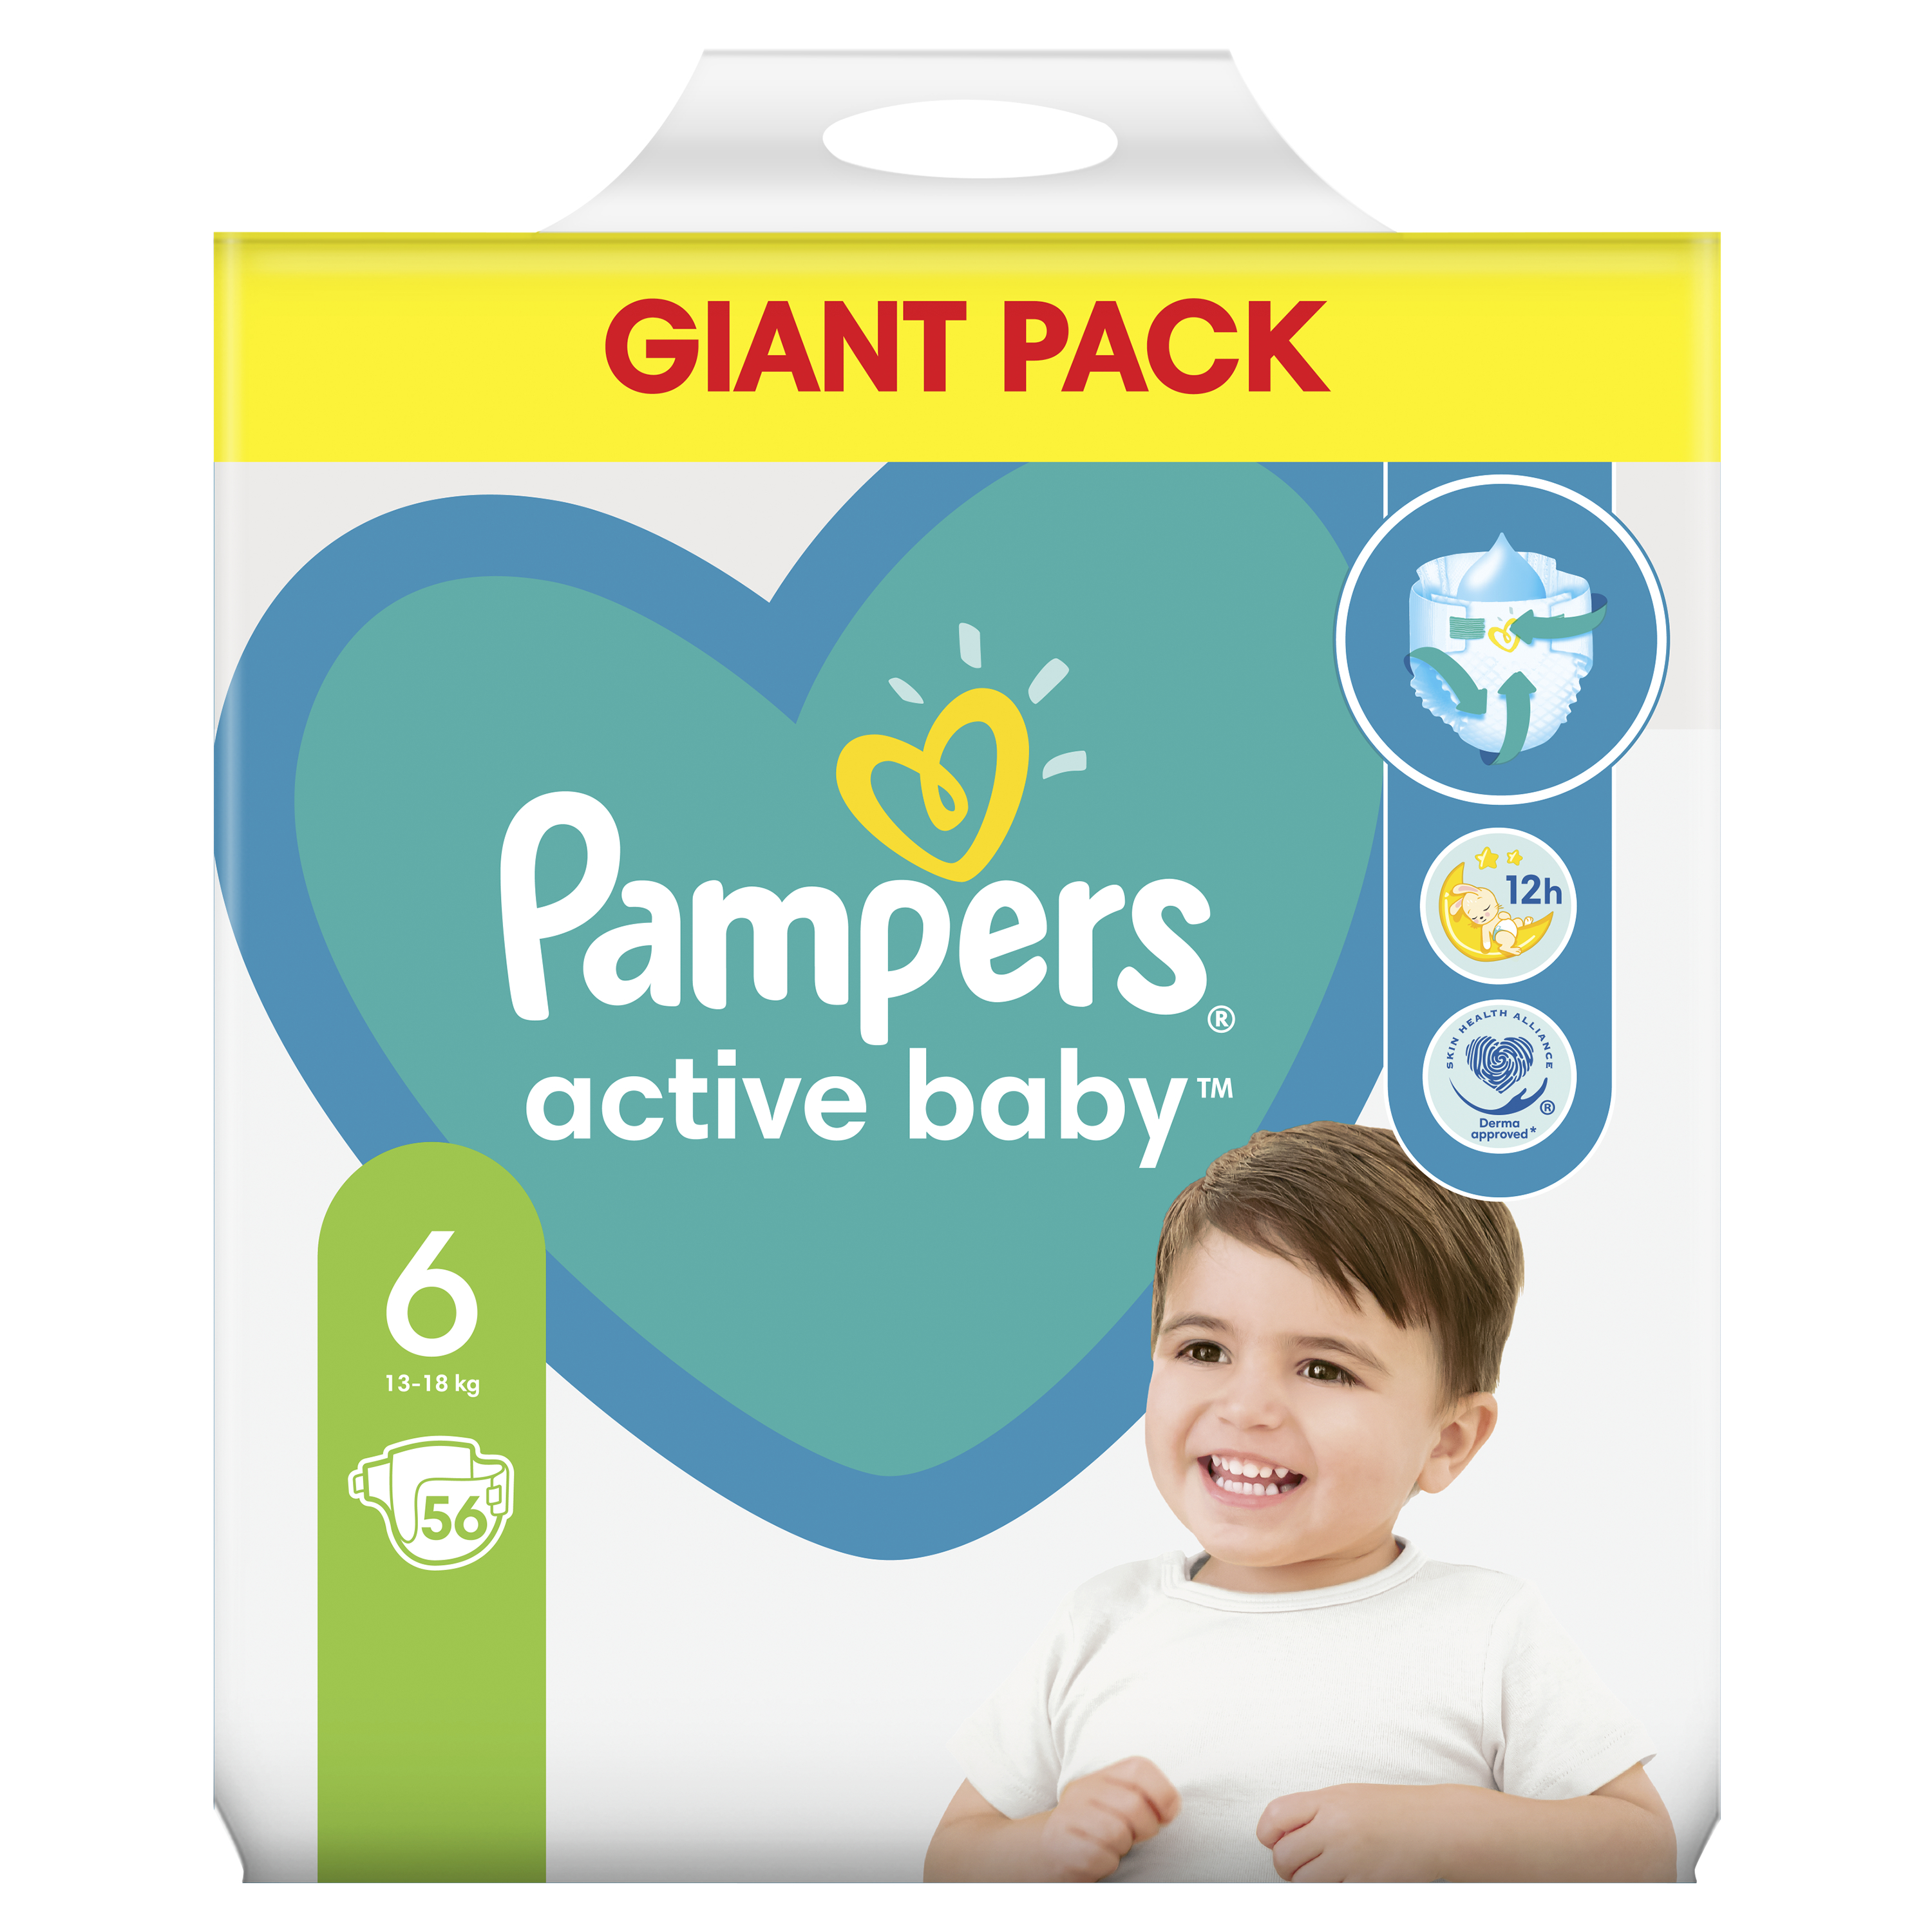 PAMPERS ACTIVE BABY PLIENKY JEDNORAZOVE 6 (13-18 KG) 56 KS, GIANT PACK